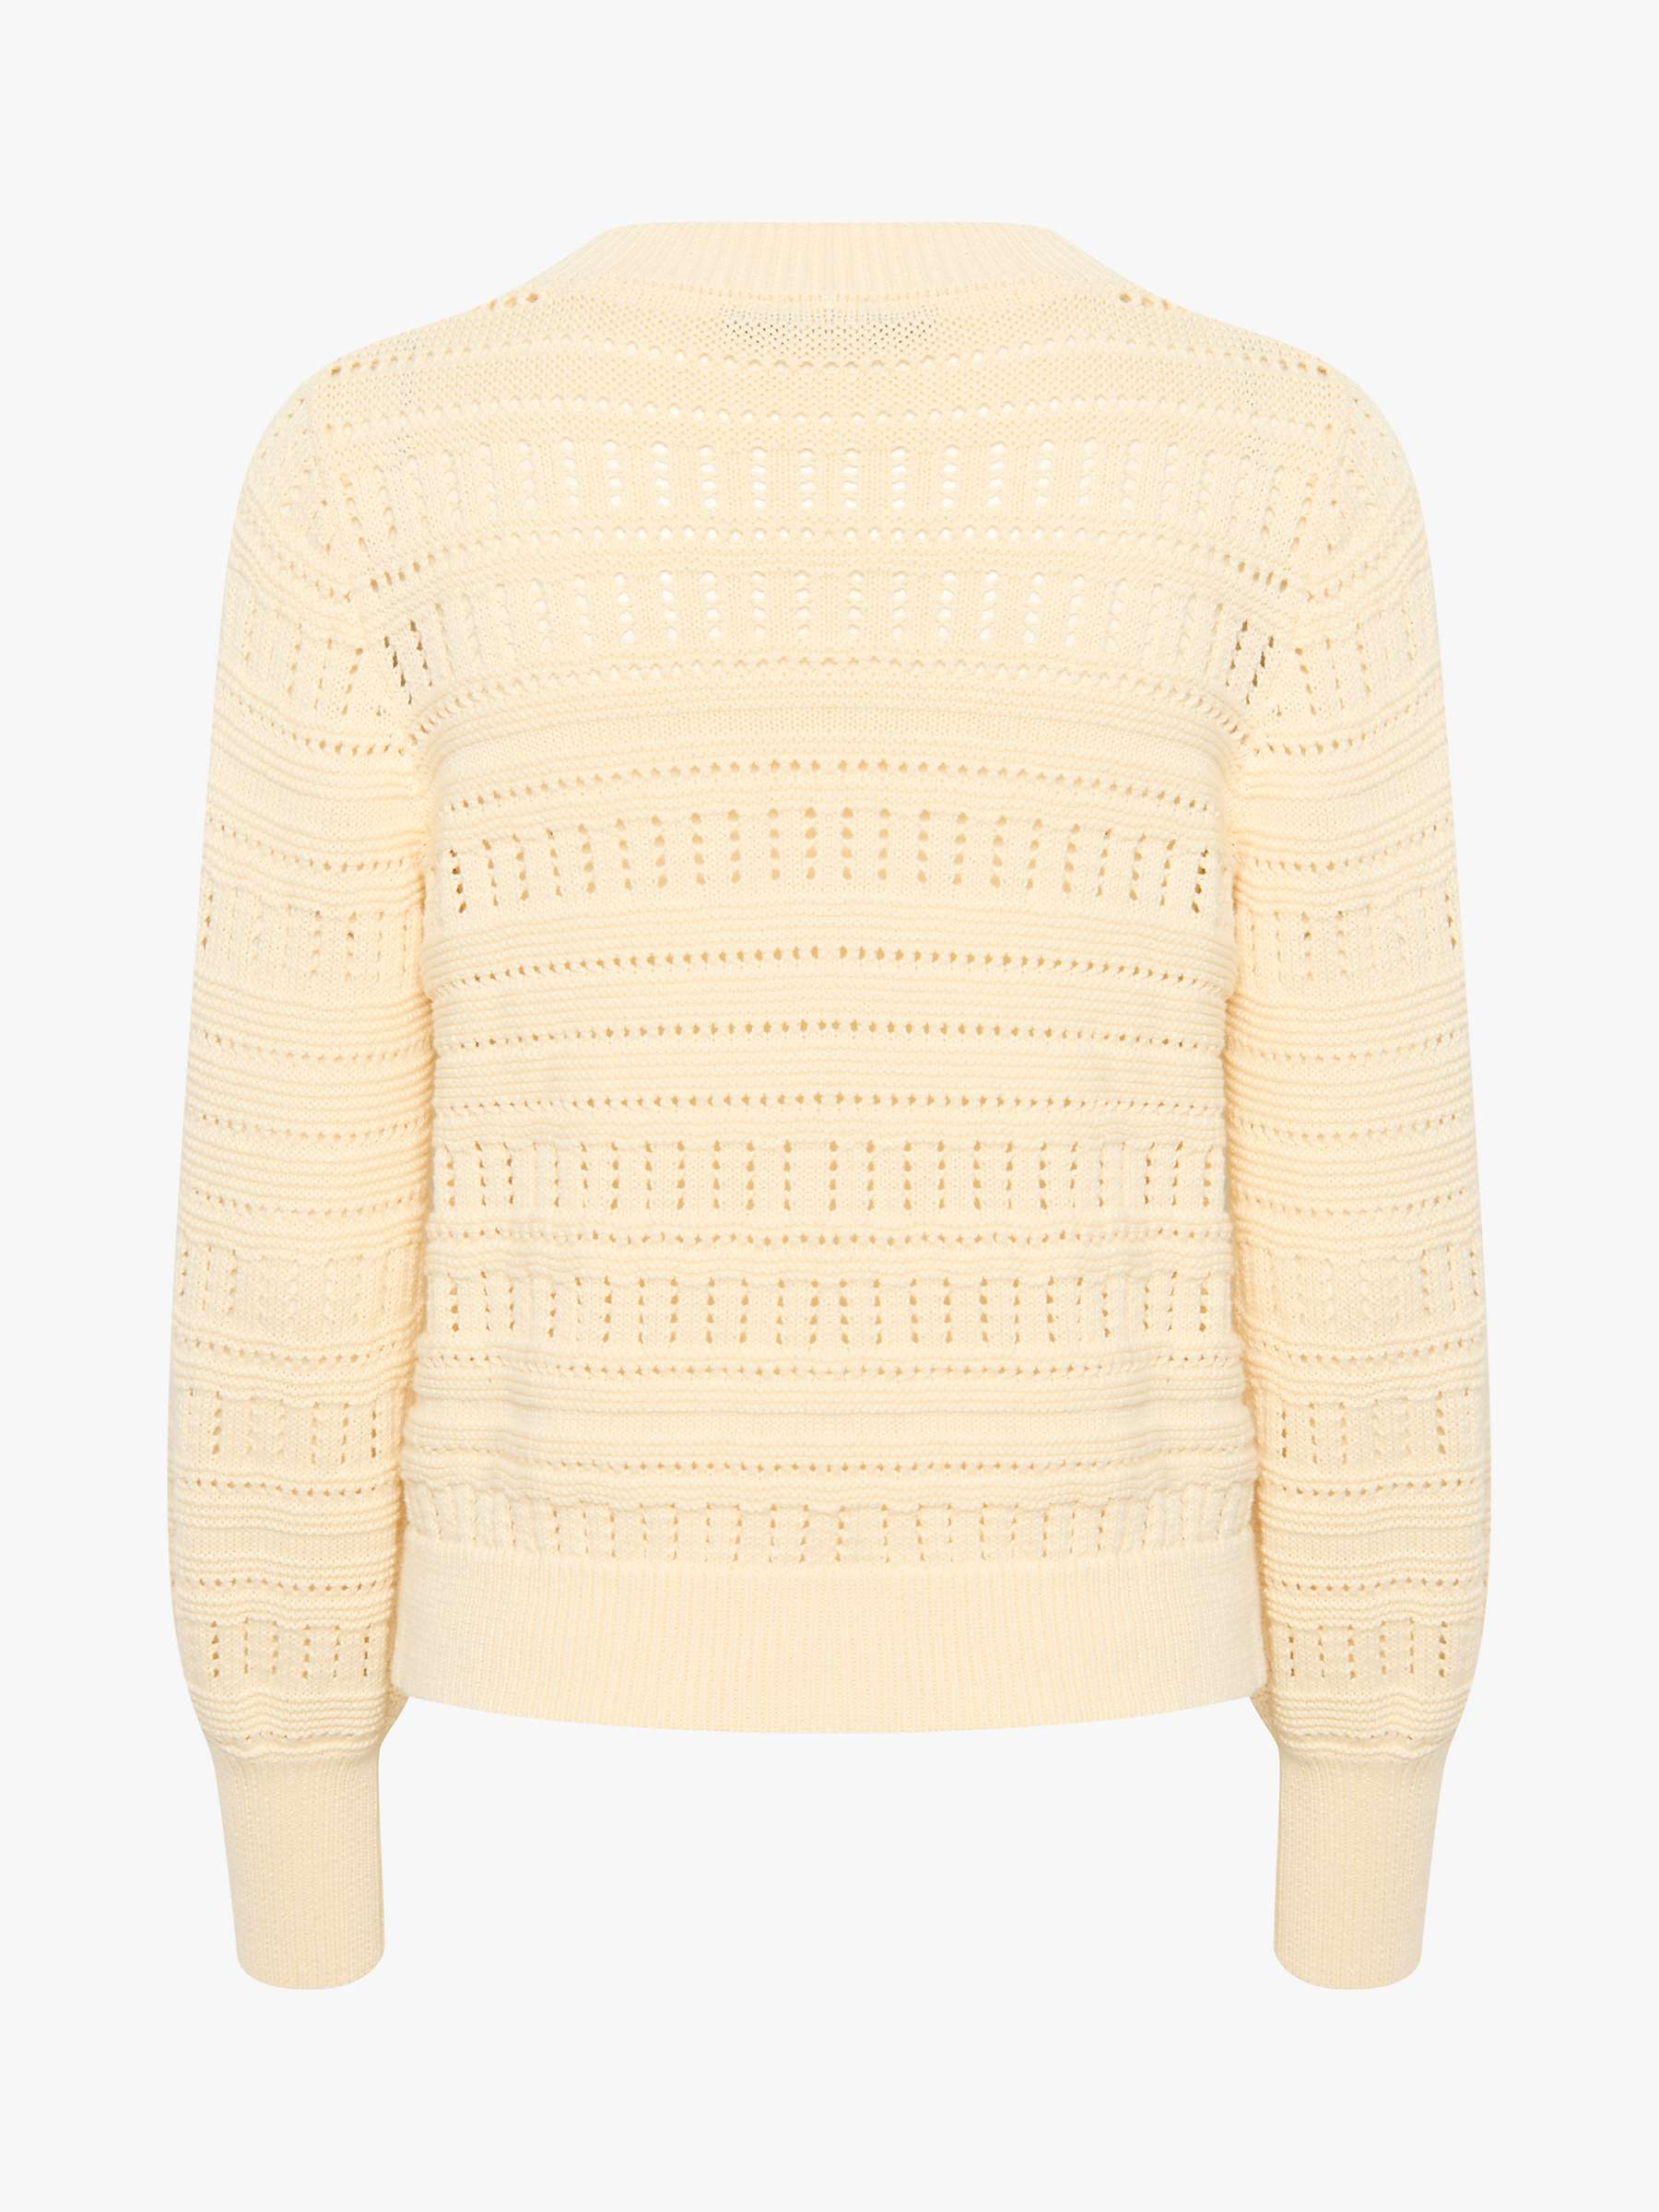 Buy Soaked In Luxury Rava Crochet Knit Cardigan, Pearled Ivory Online at johnlewis.com